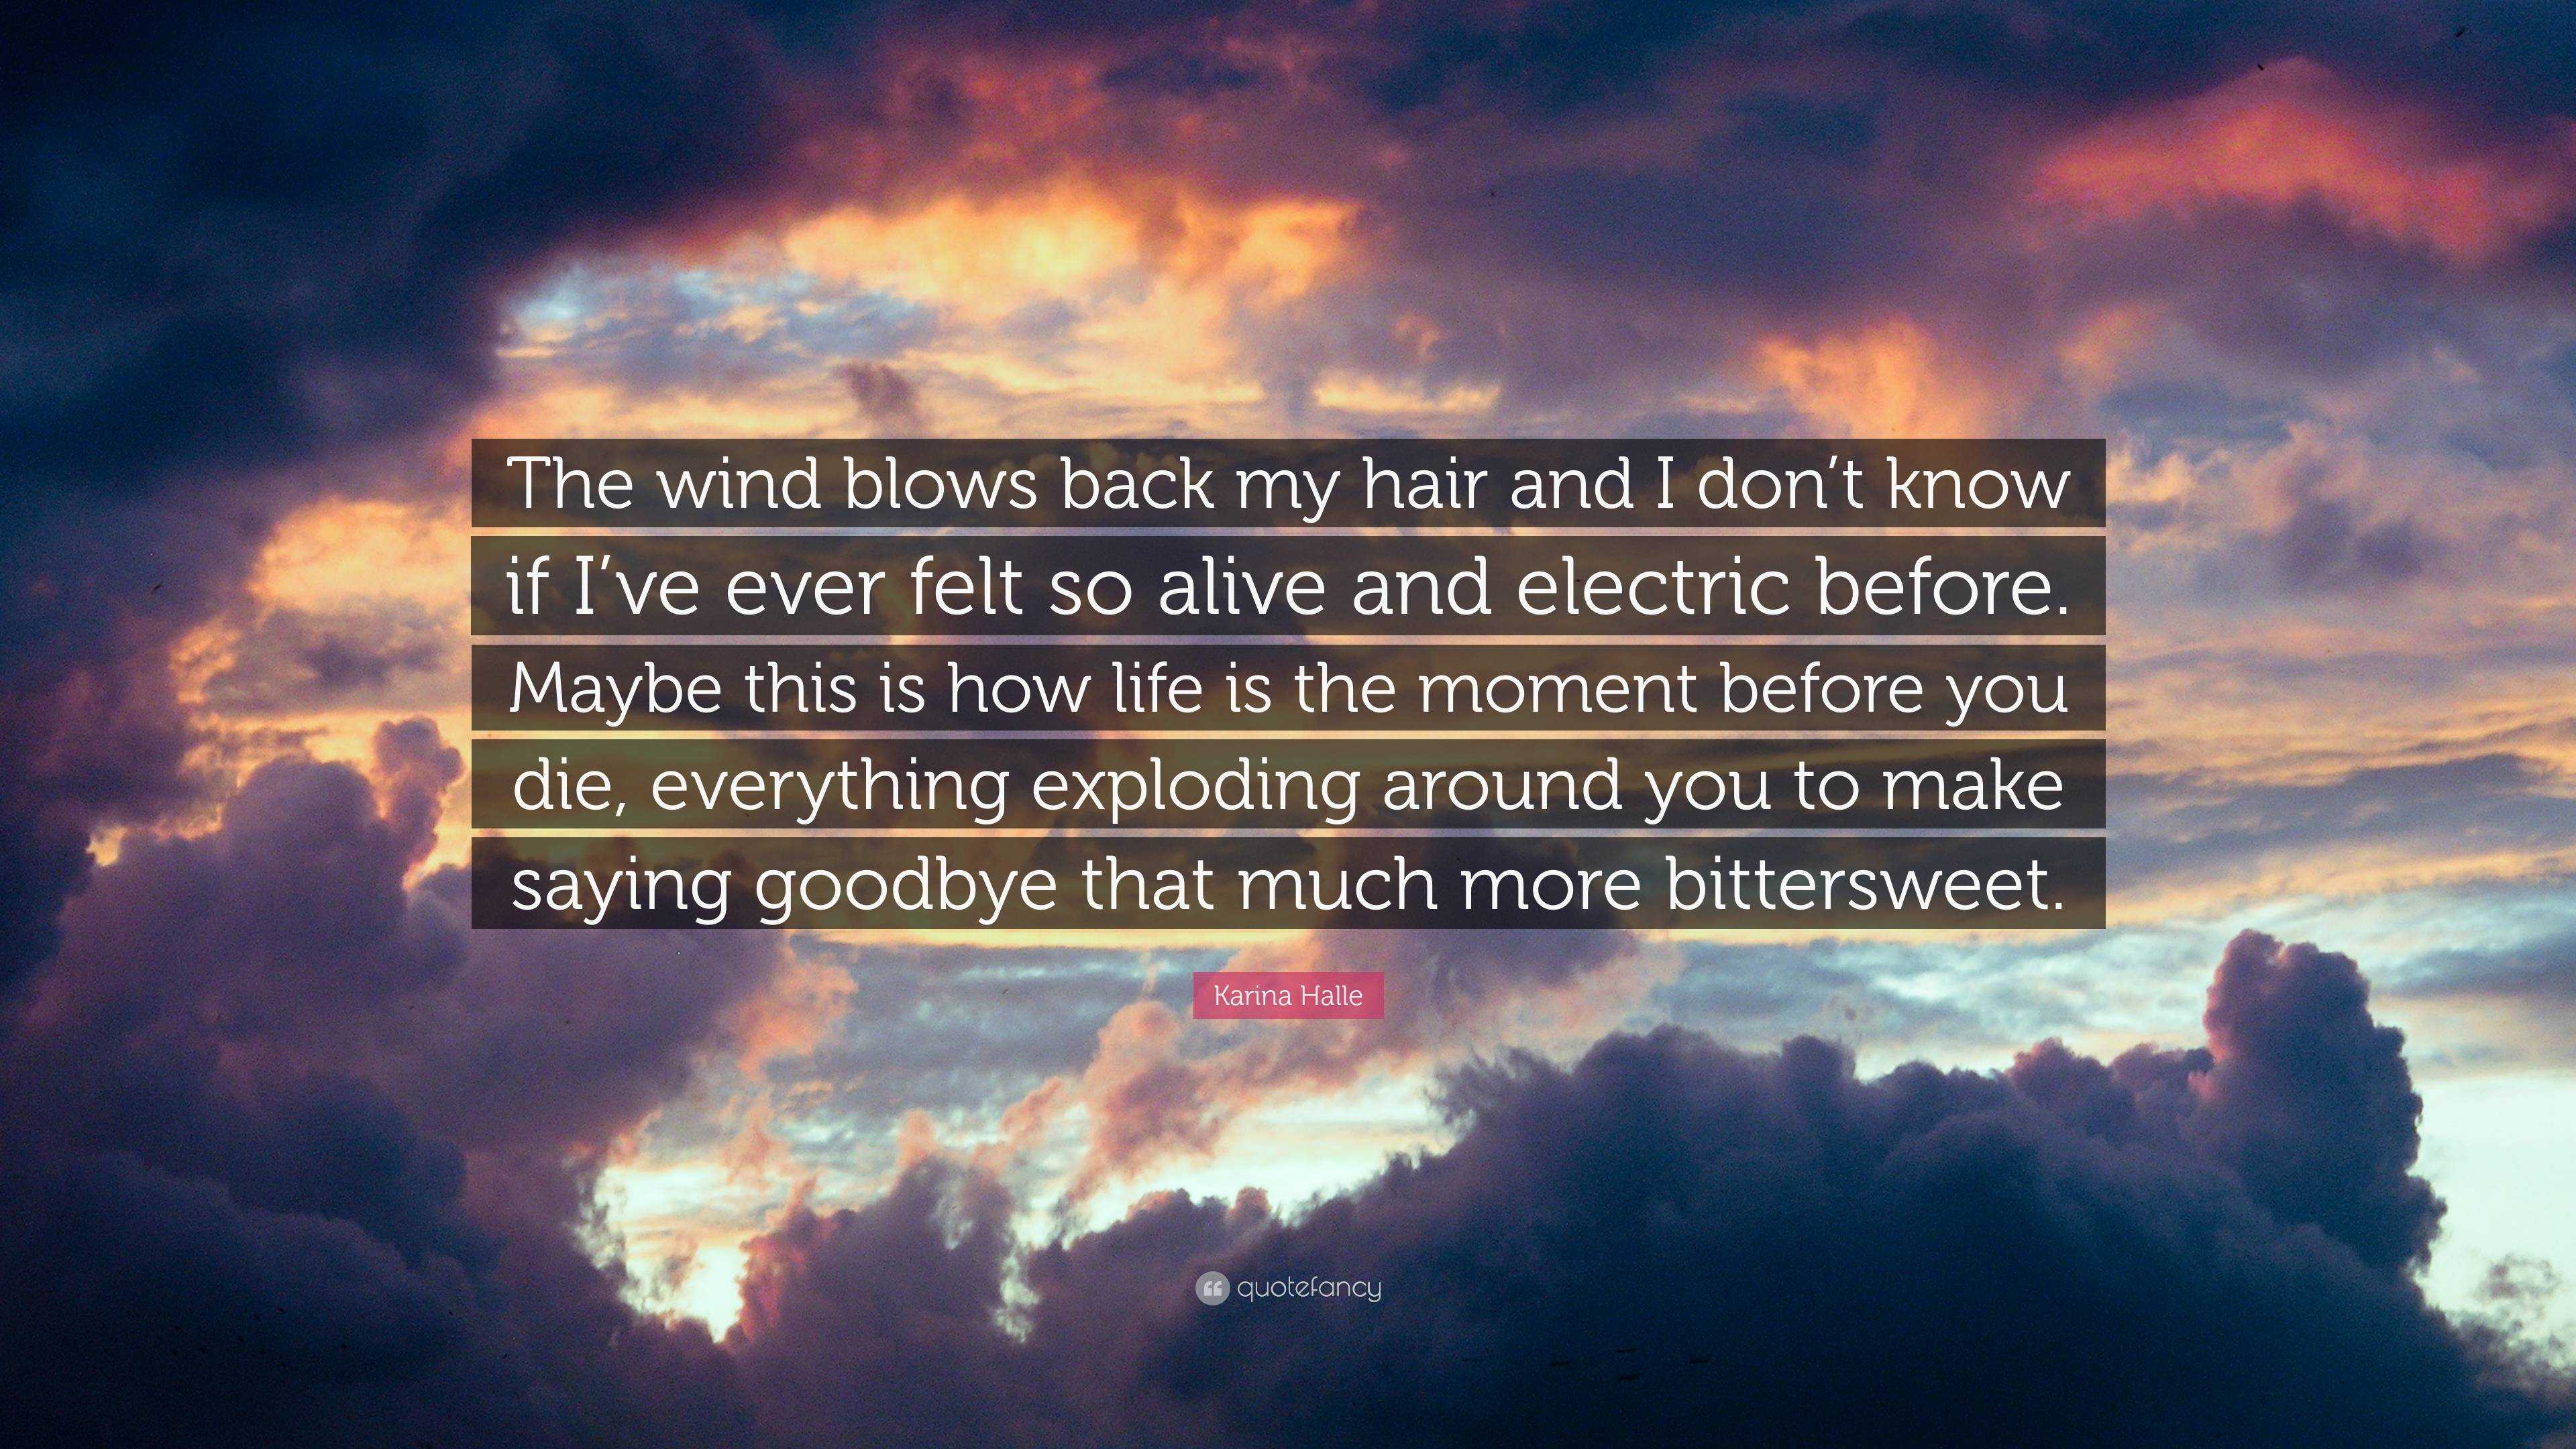 Karina Halle Quote: “The wind blows back my hair and I don't know if I've  ever felt so alive and electric before. Maybe this is how life is t...”